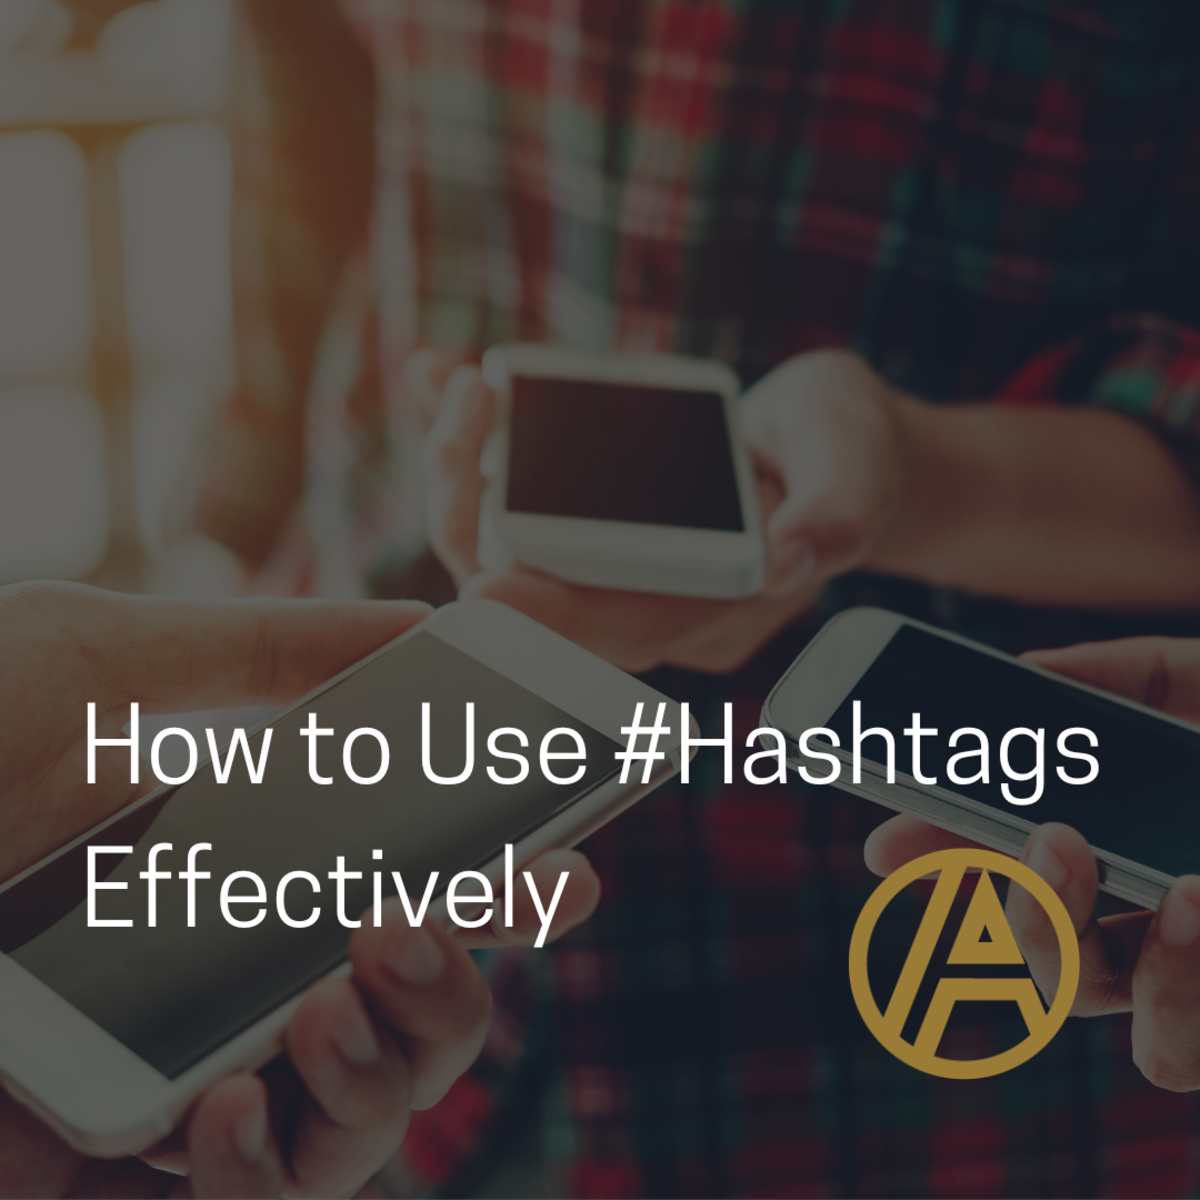 Smart Hashtags for Your #LocalBusiness